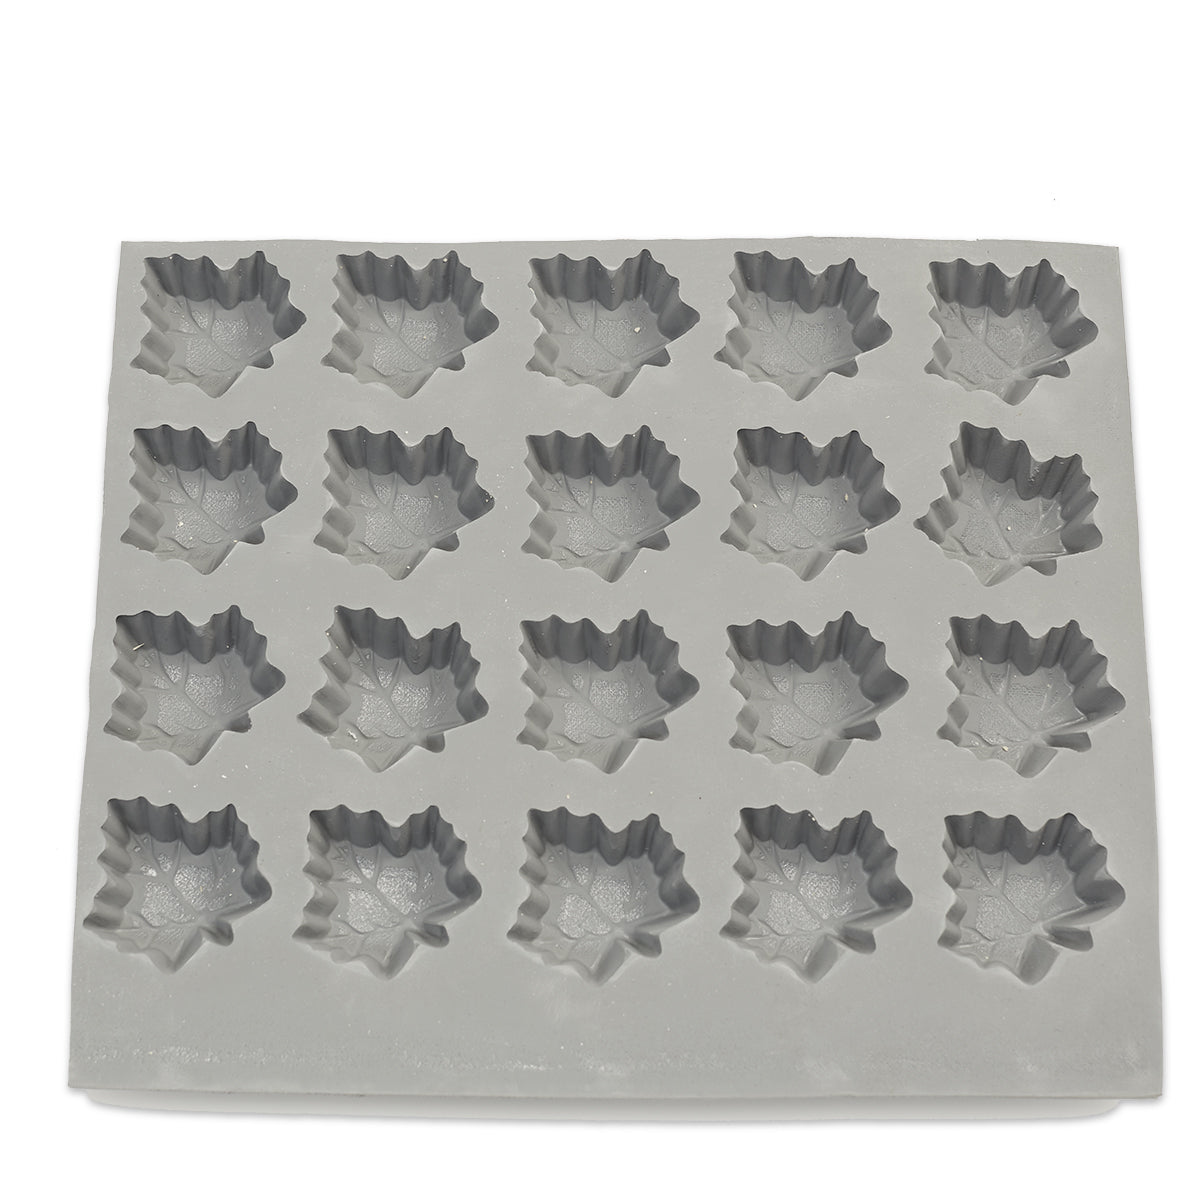 1/3 oz Maple Leaf Rubber Candy Mold (20 Cavity)